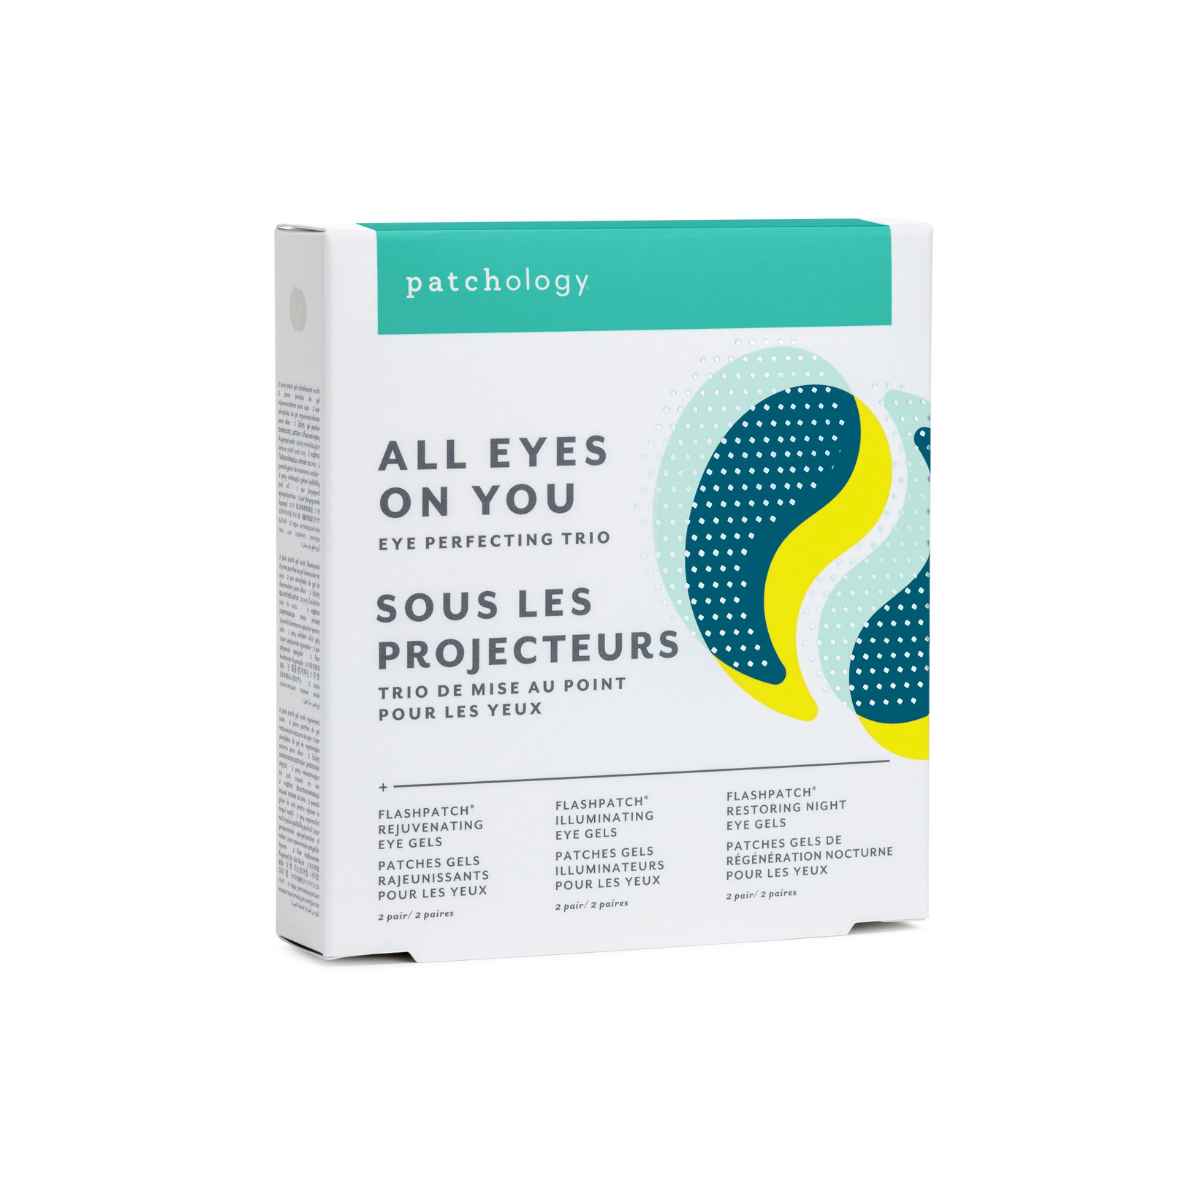 Patchology All Eyes On You Eye Gels